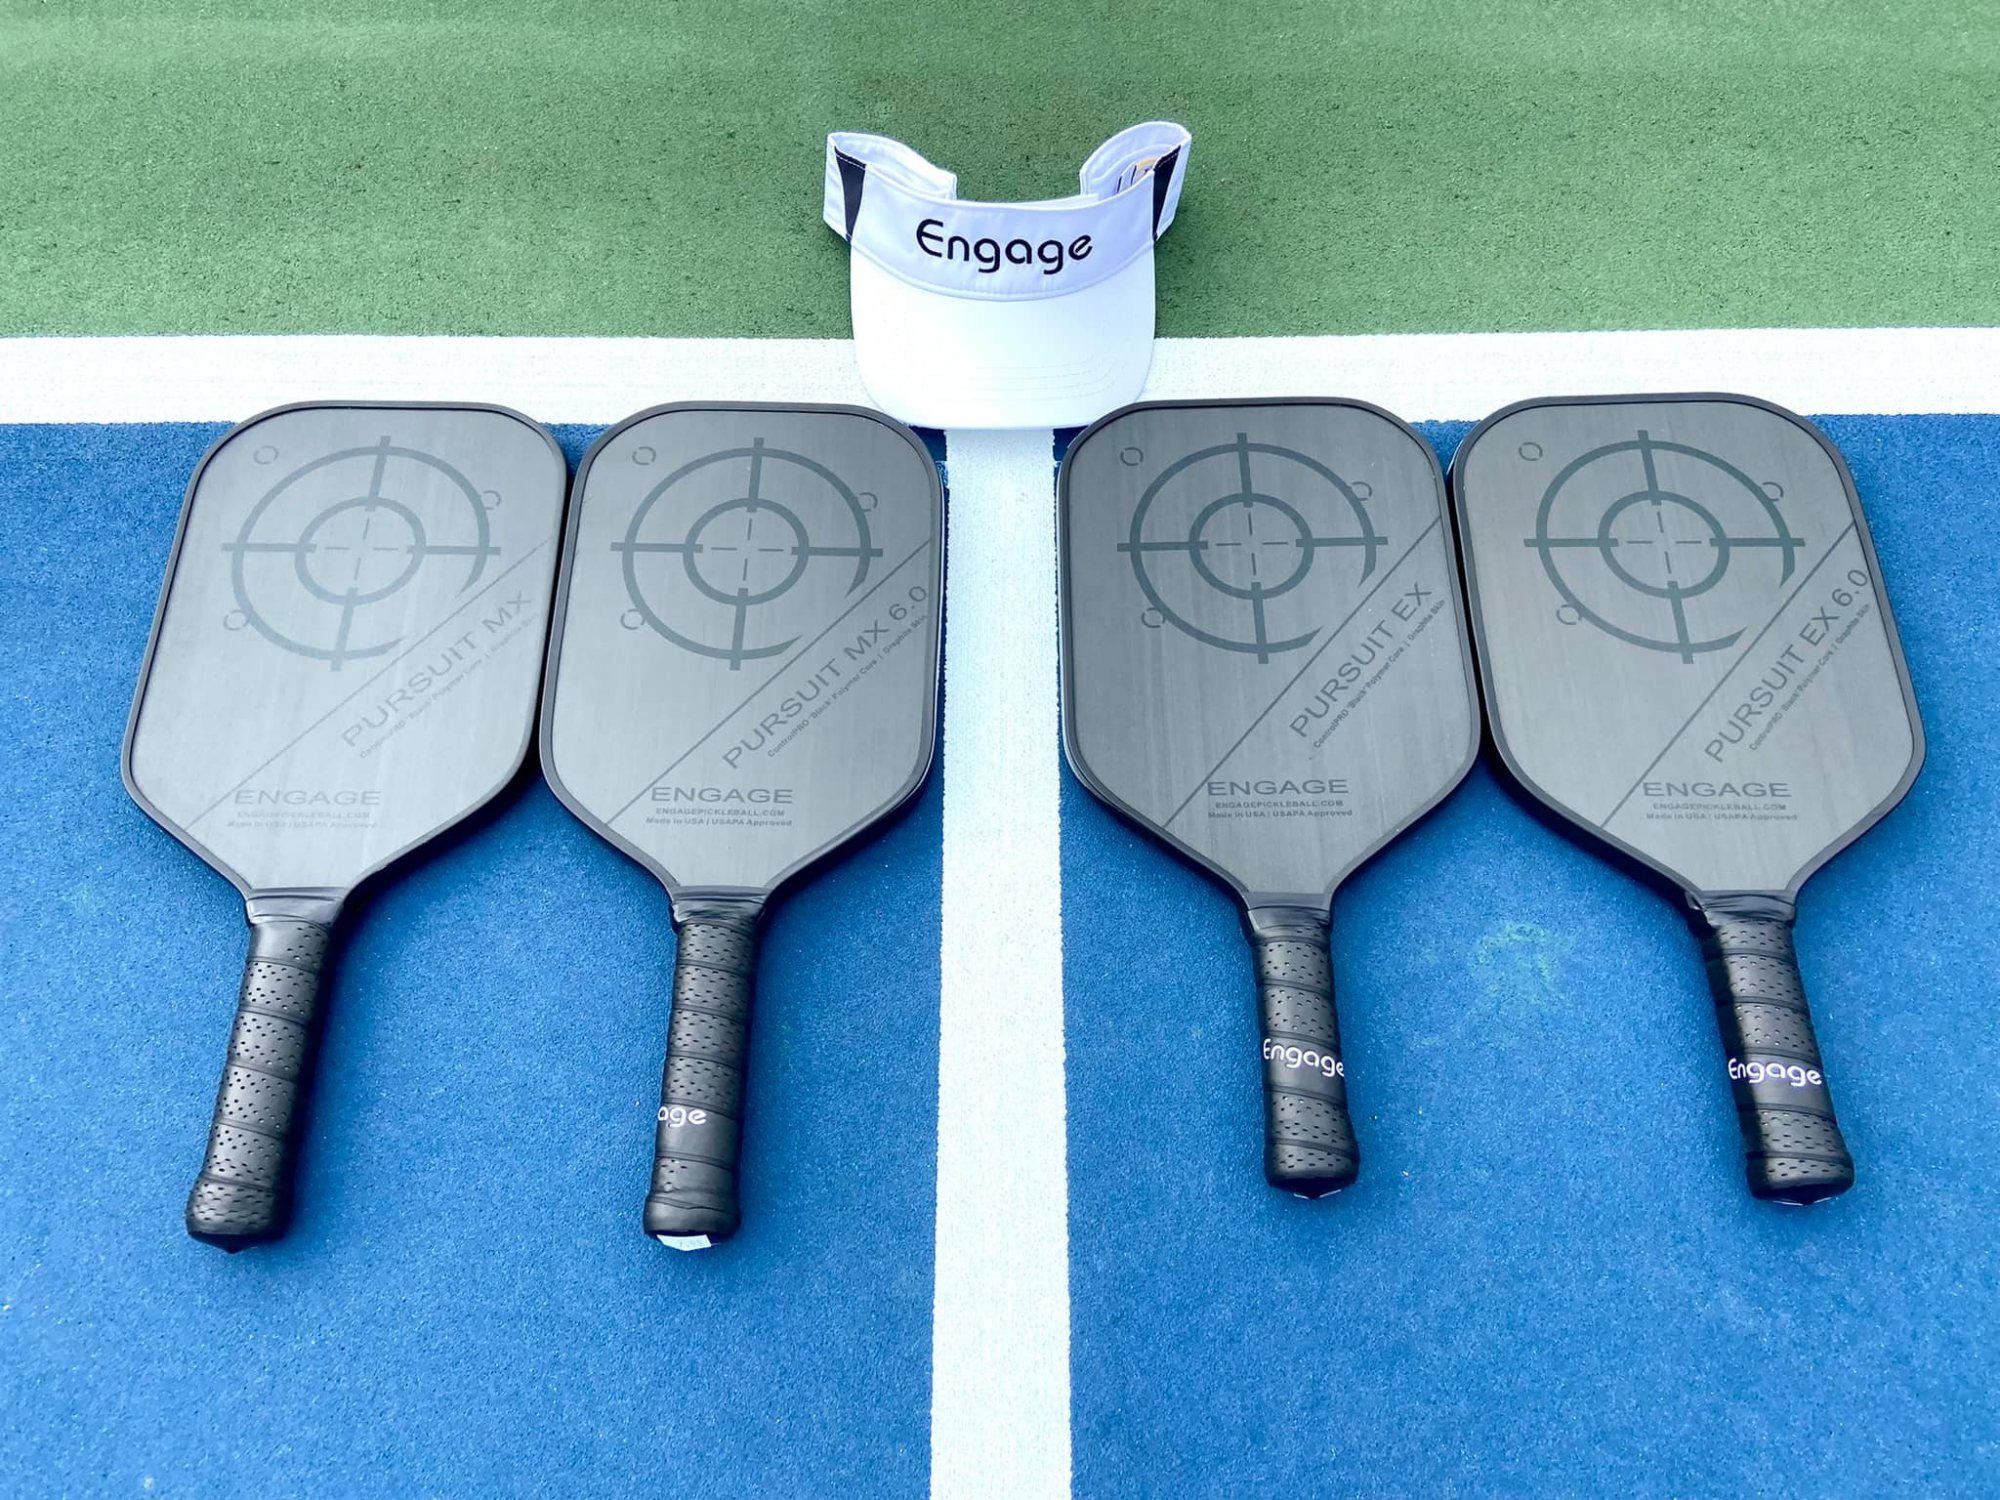 Engage Pickleball Paddles Stocked In Canada! - Shuswap Ski and Board